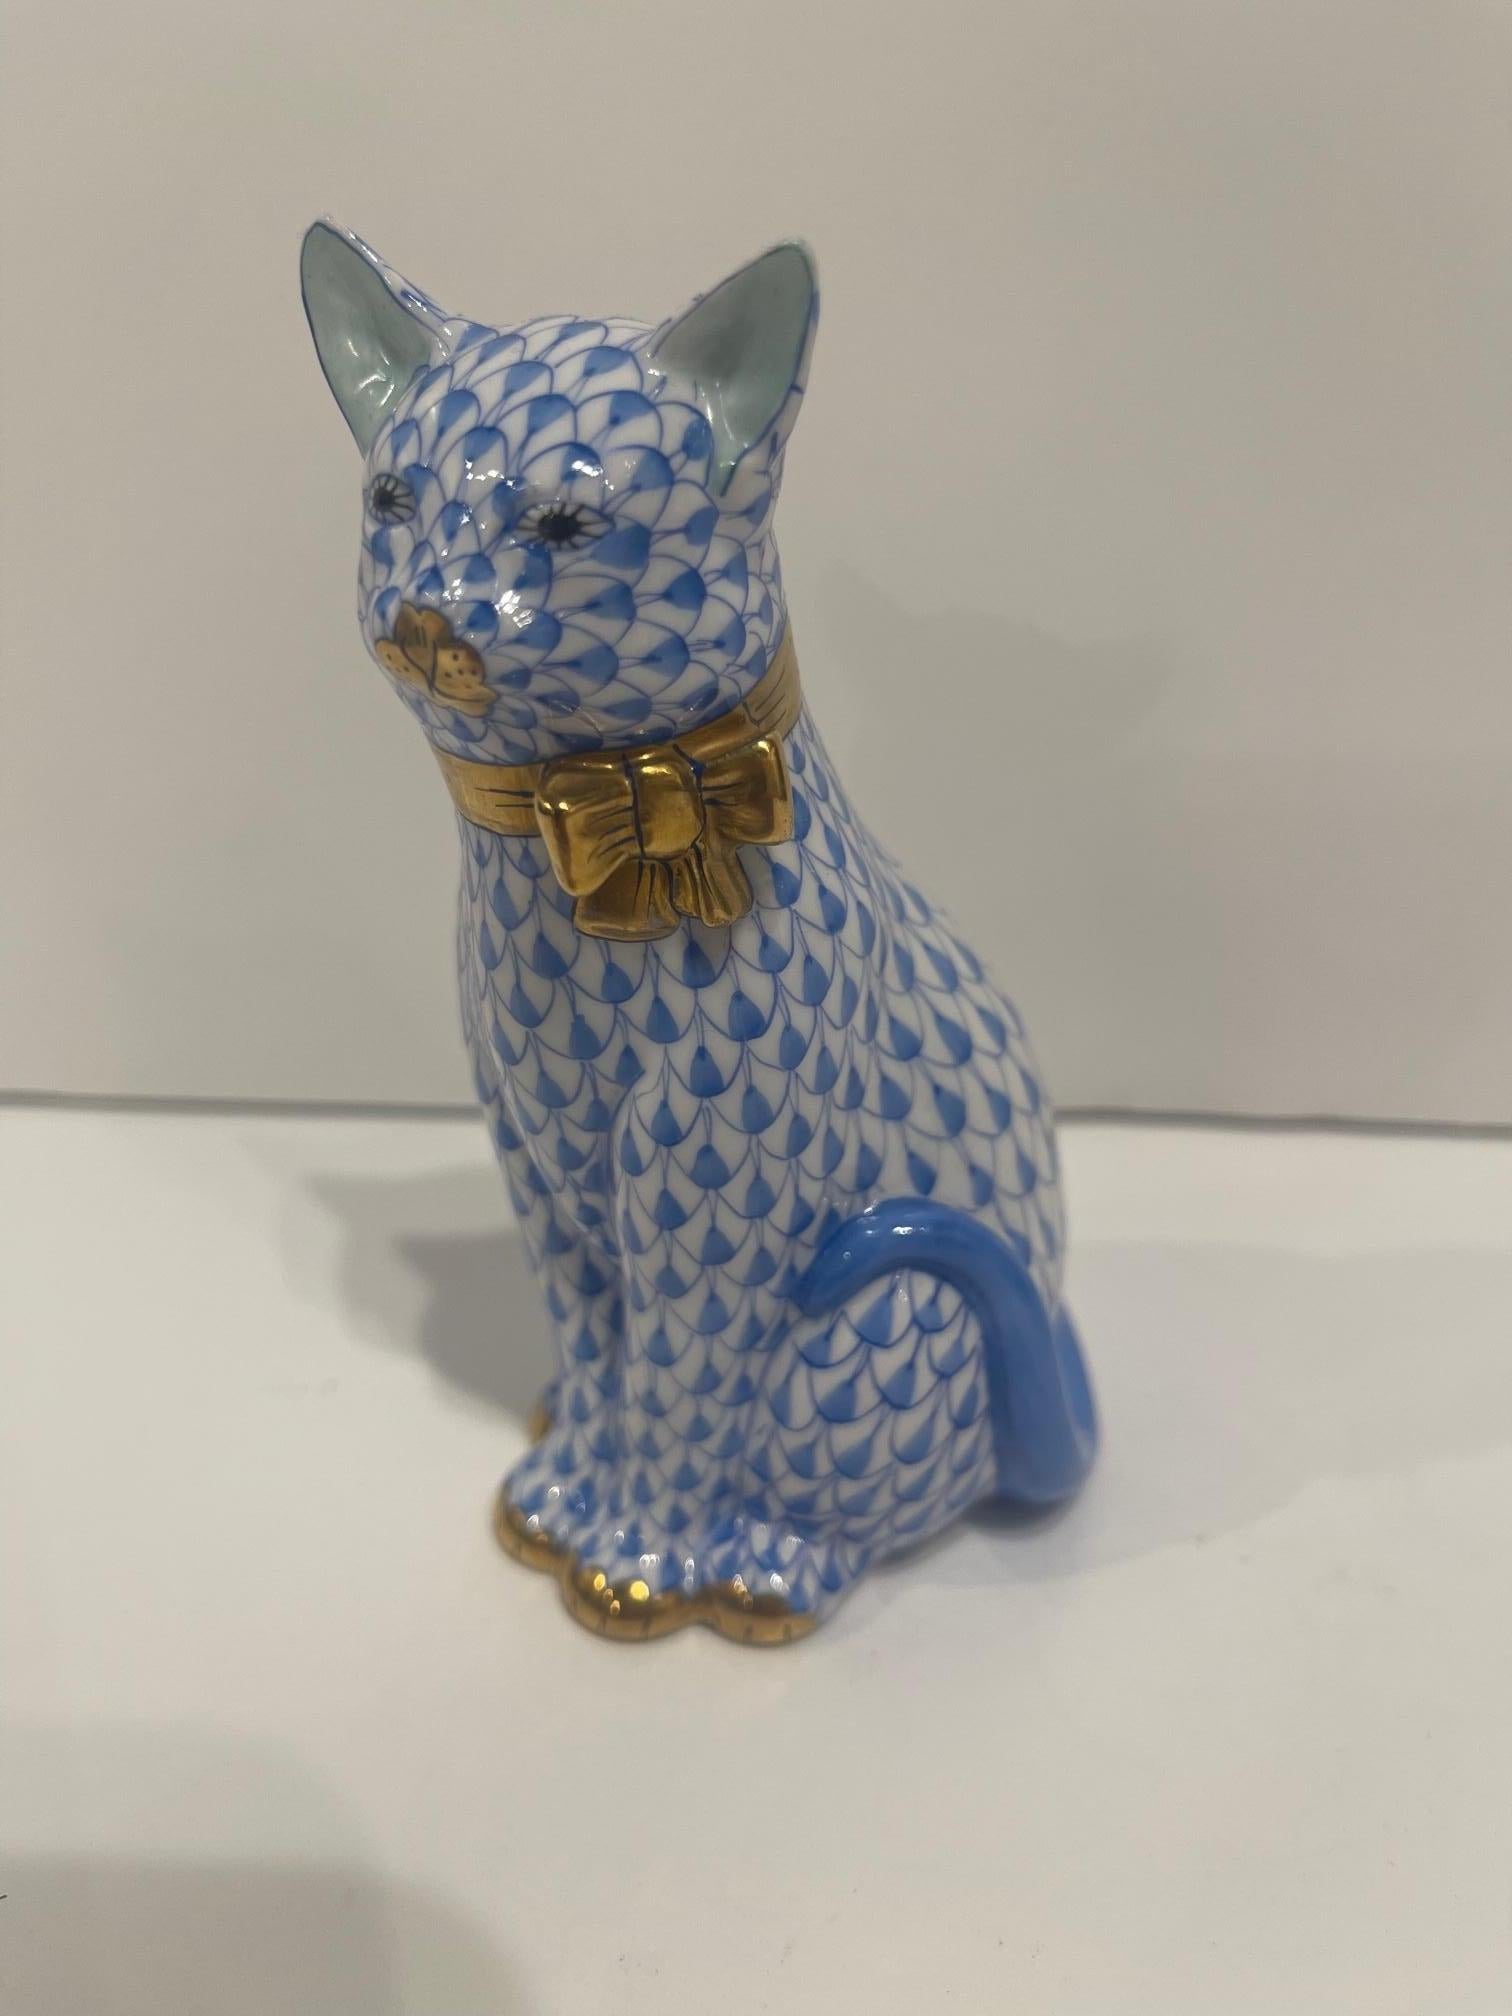 Herend Figure of a Blue and White Sitting Cat, 20th Century In Good Condition For Sale In Savannah, GA